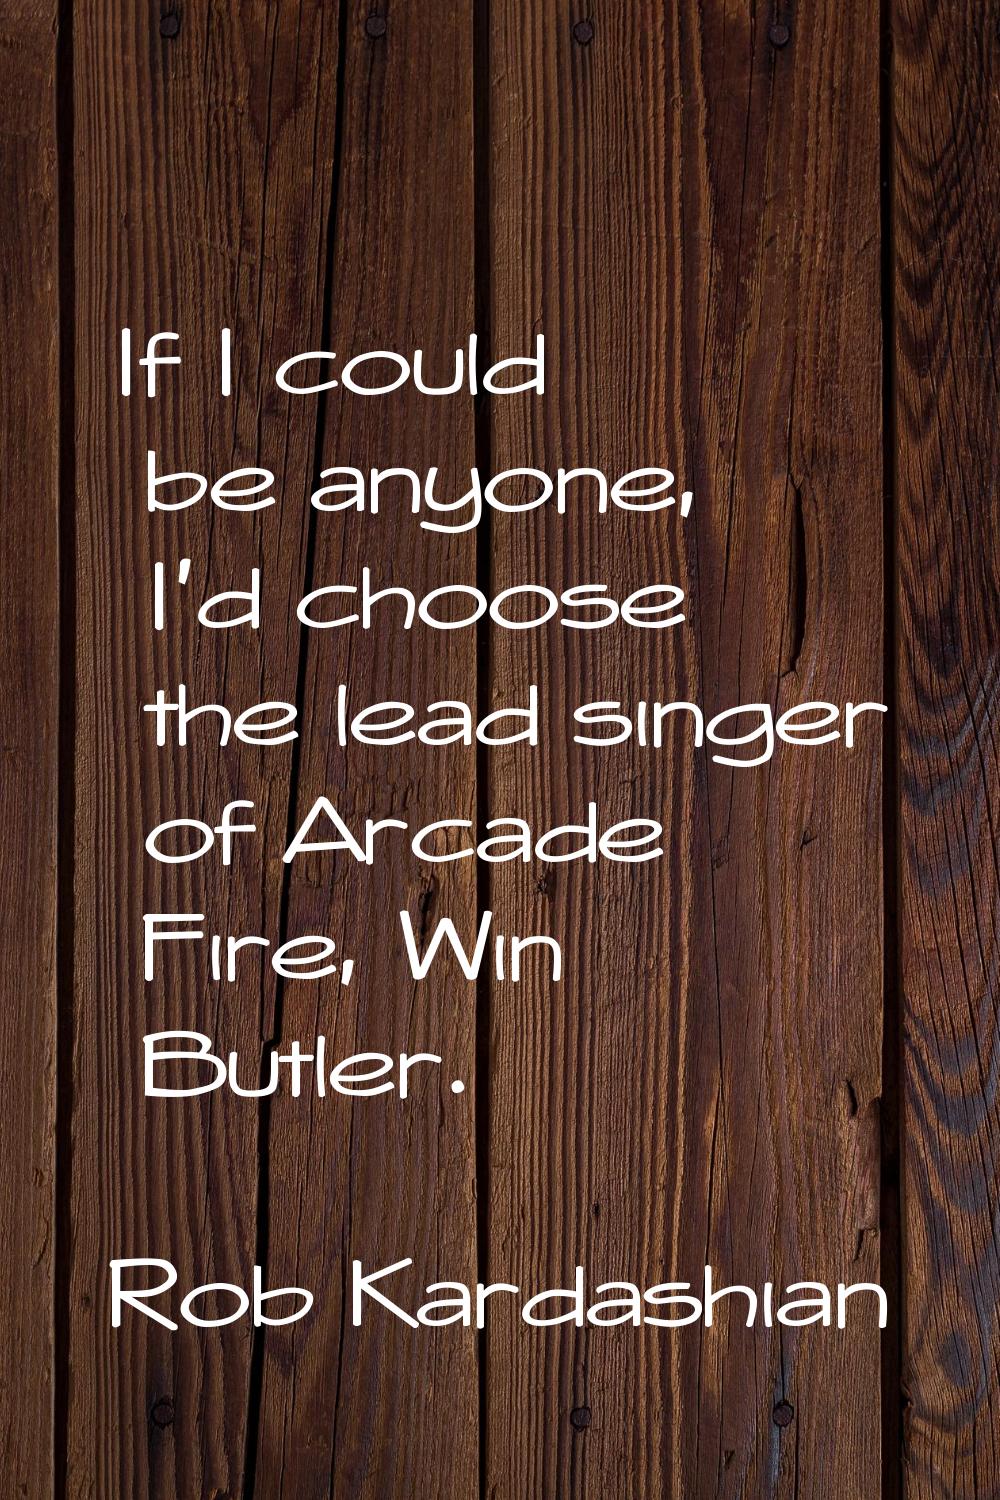 If I could be anyone, I'd choose the lead singer of Arcade Fire, Win Butler.